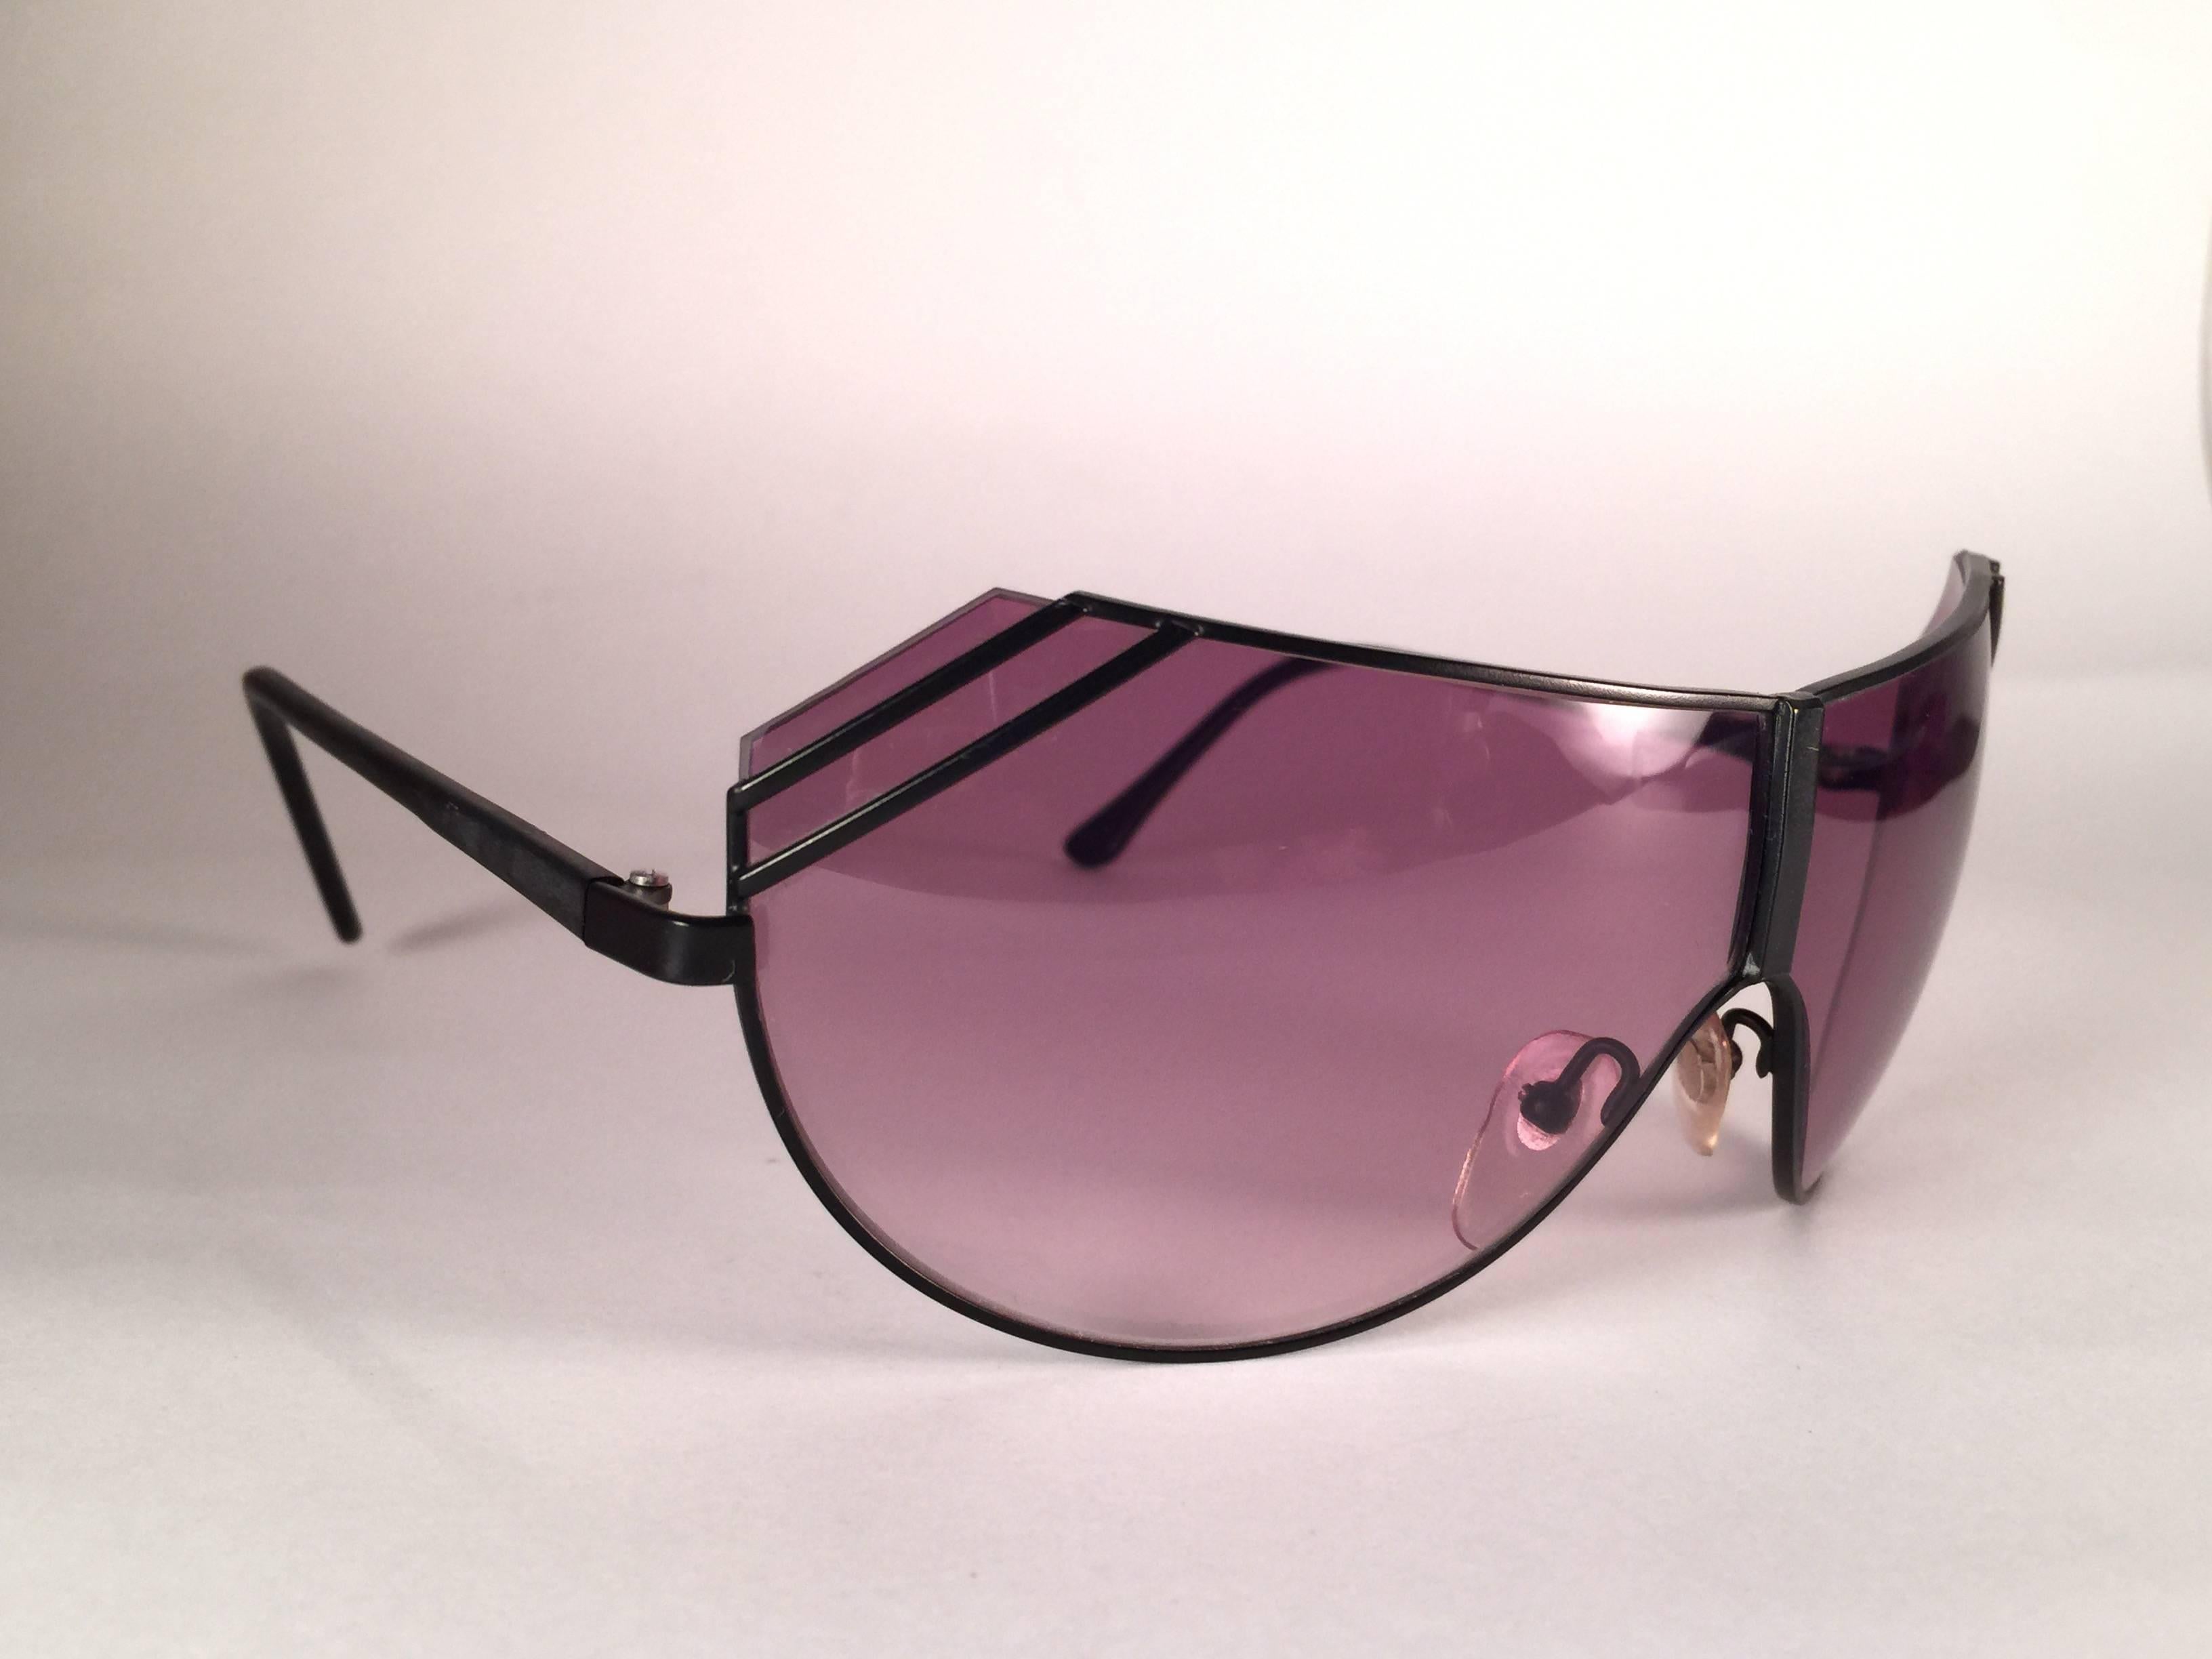 New Vintage Gianni Versace sleek Matte black mask holding a pair of light purple gradient lenses.

New never worn or displayed. This pair could show minor sign of wear due to storage.

Made in italy.
